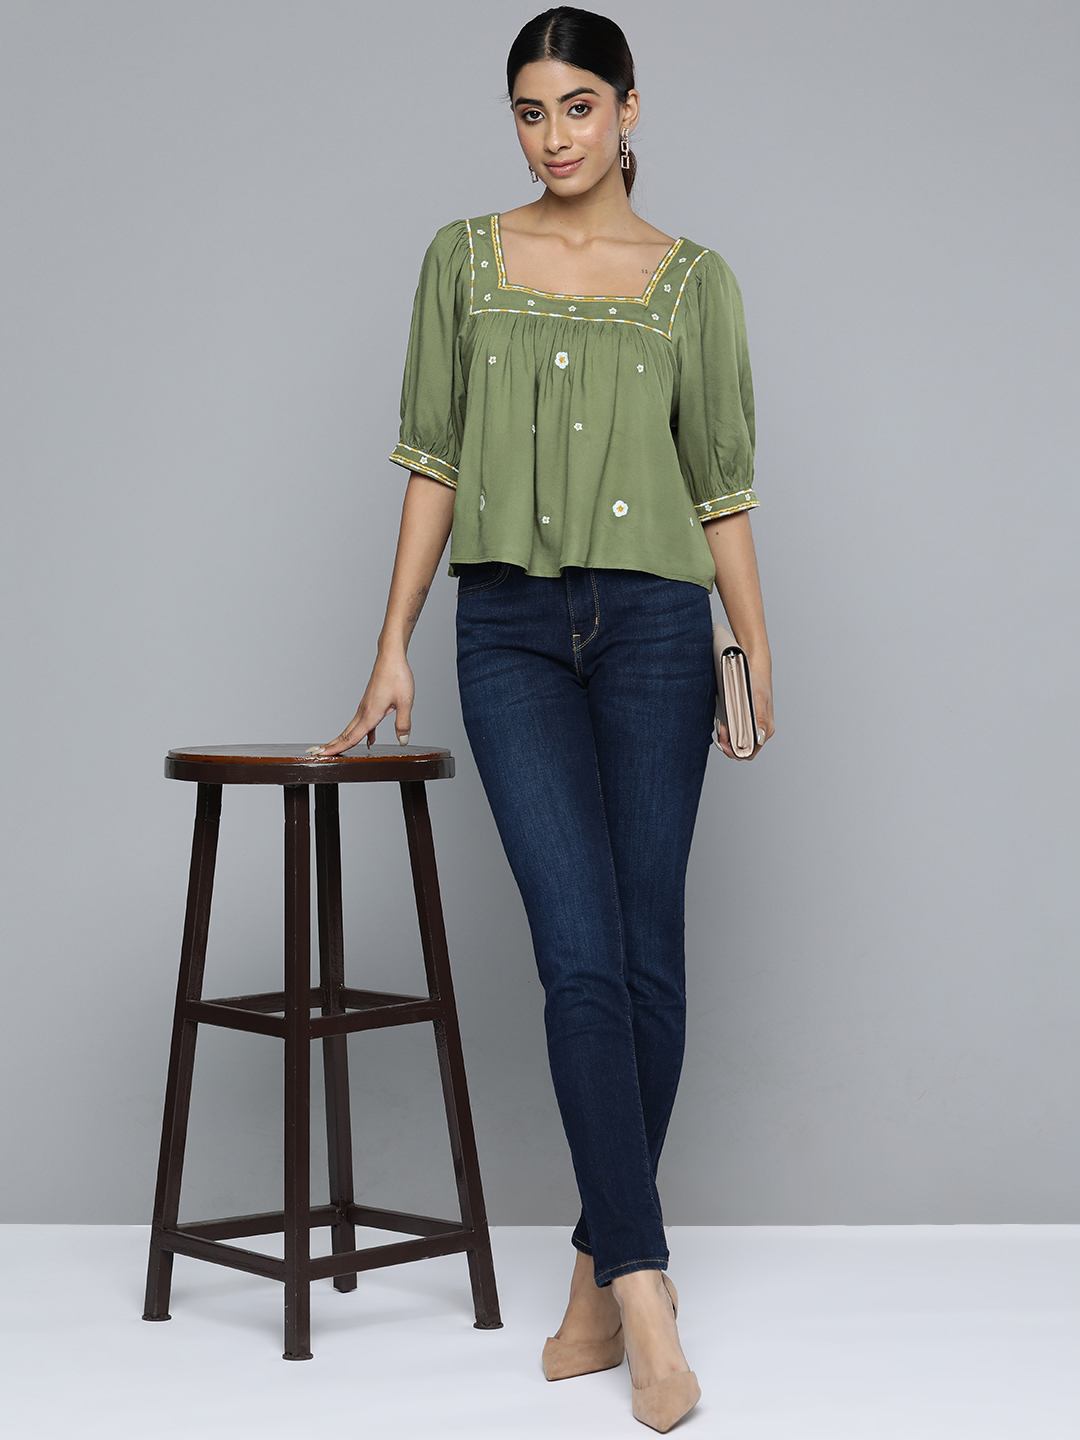 Square Neckline Olive Green Embroidered Crop Top